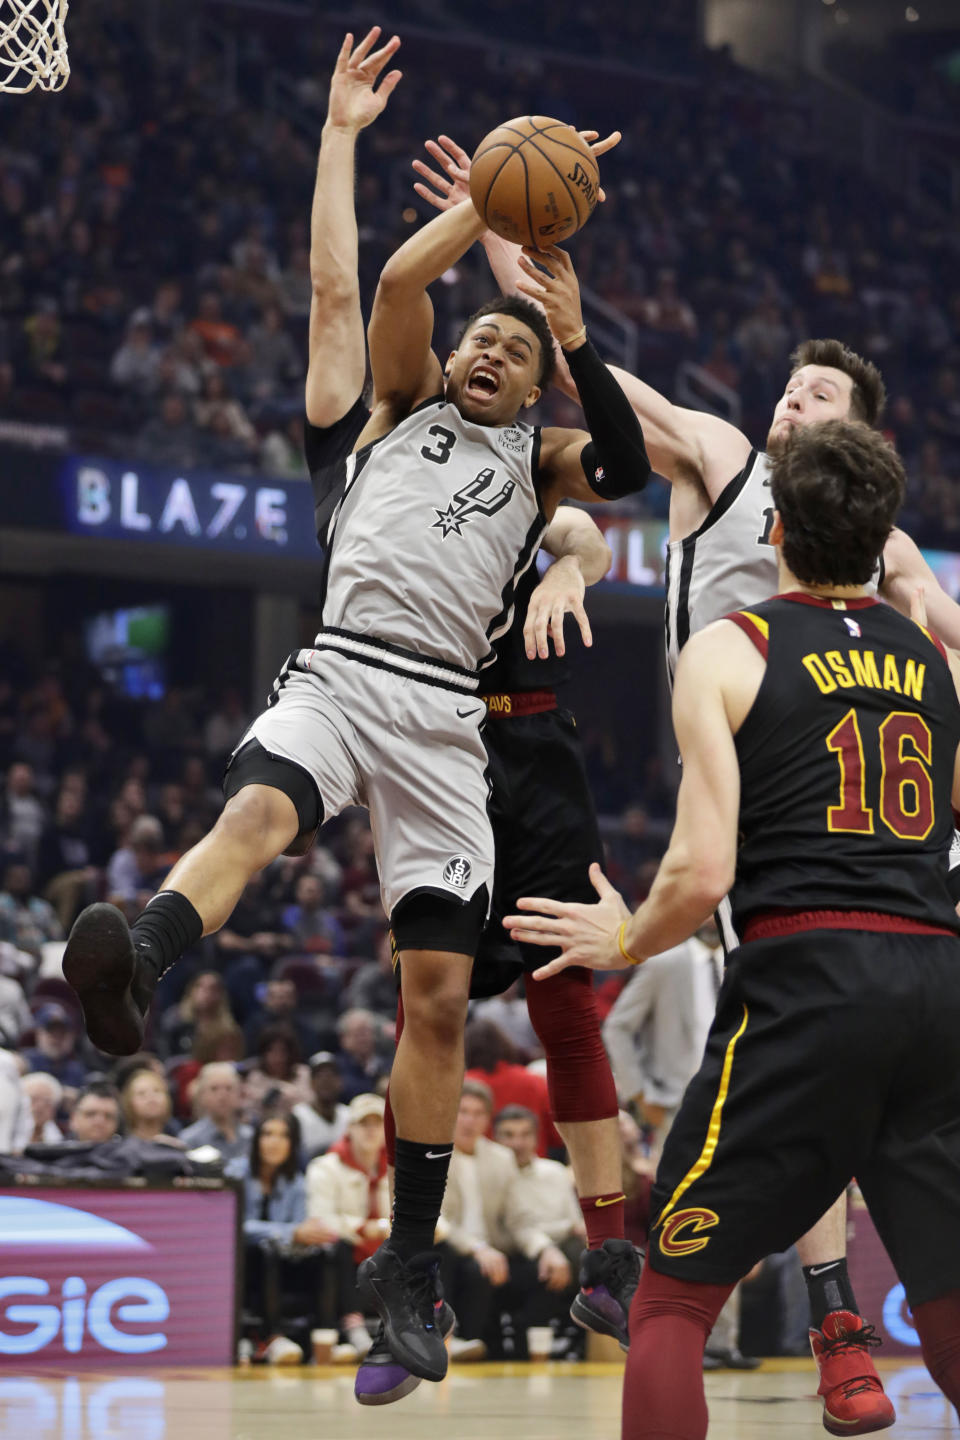 San Antonio Spurs' Keldon Johnson (3) grabs a rebound against the Cleveland Cavaliers in the first half of an NBA basketball game, Sunday, March 8, 2020, in Cleveland. (AP Photo/Tony Dejak)